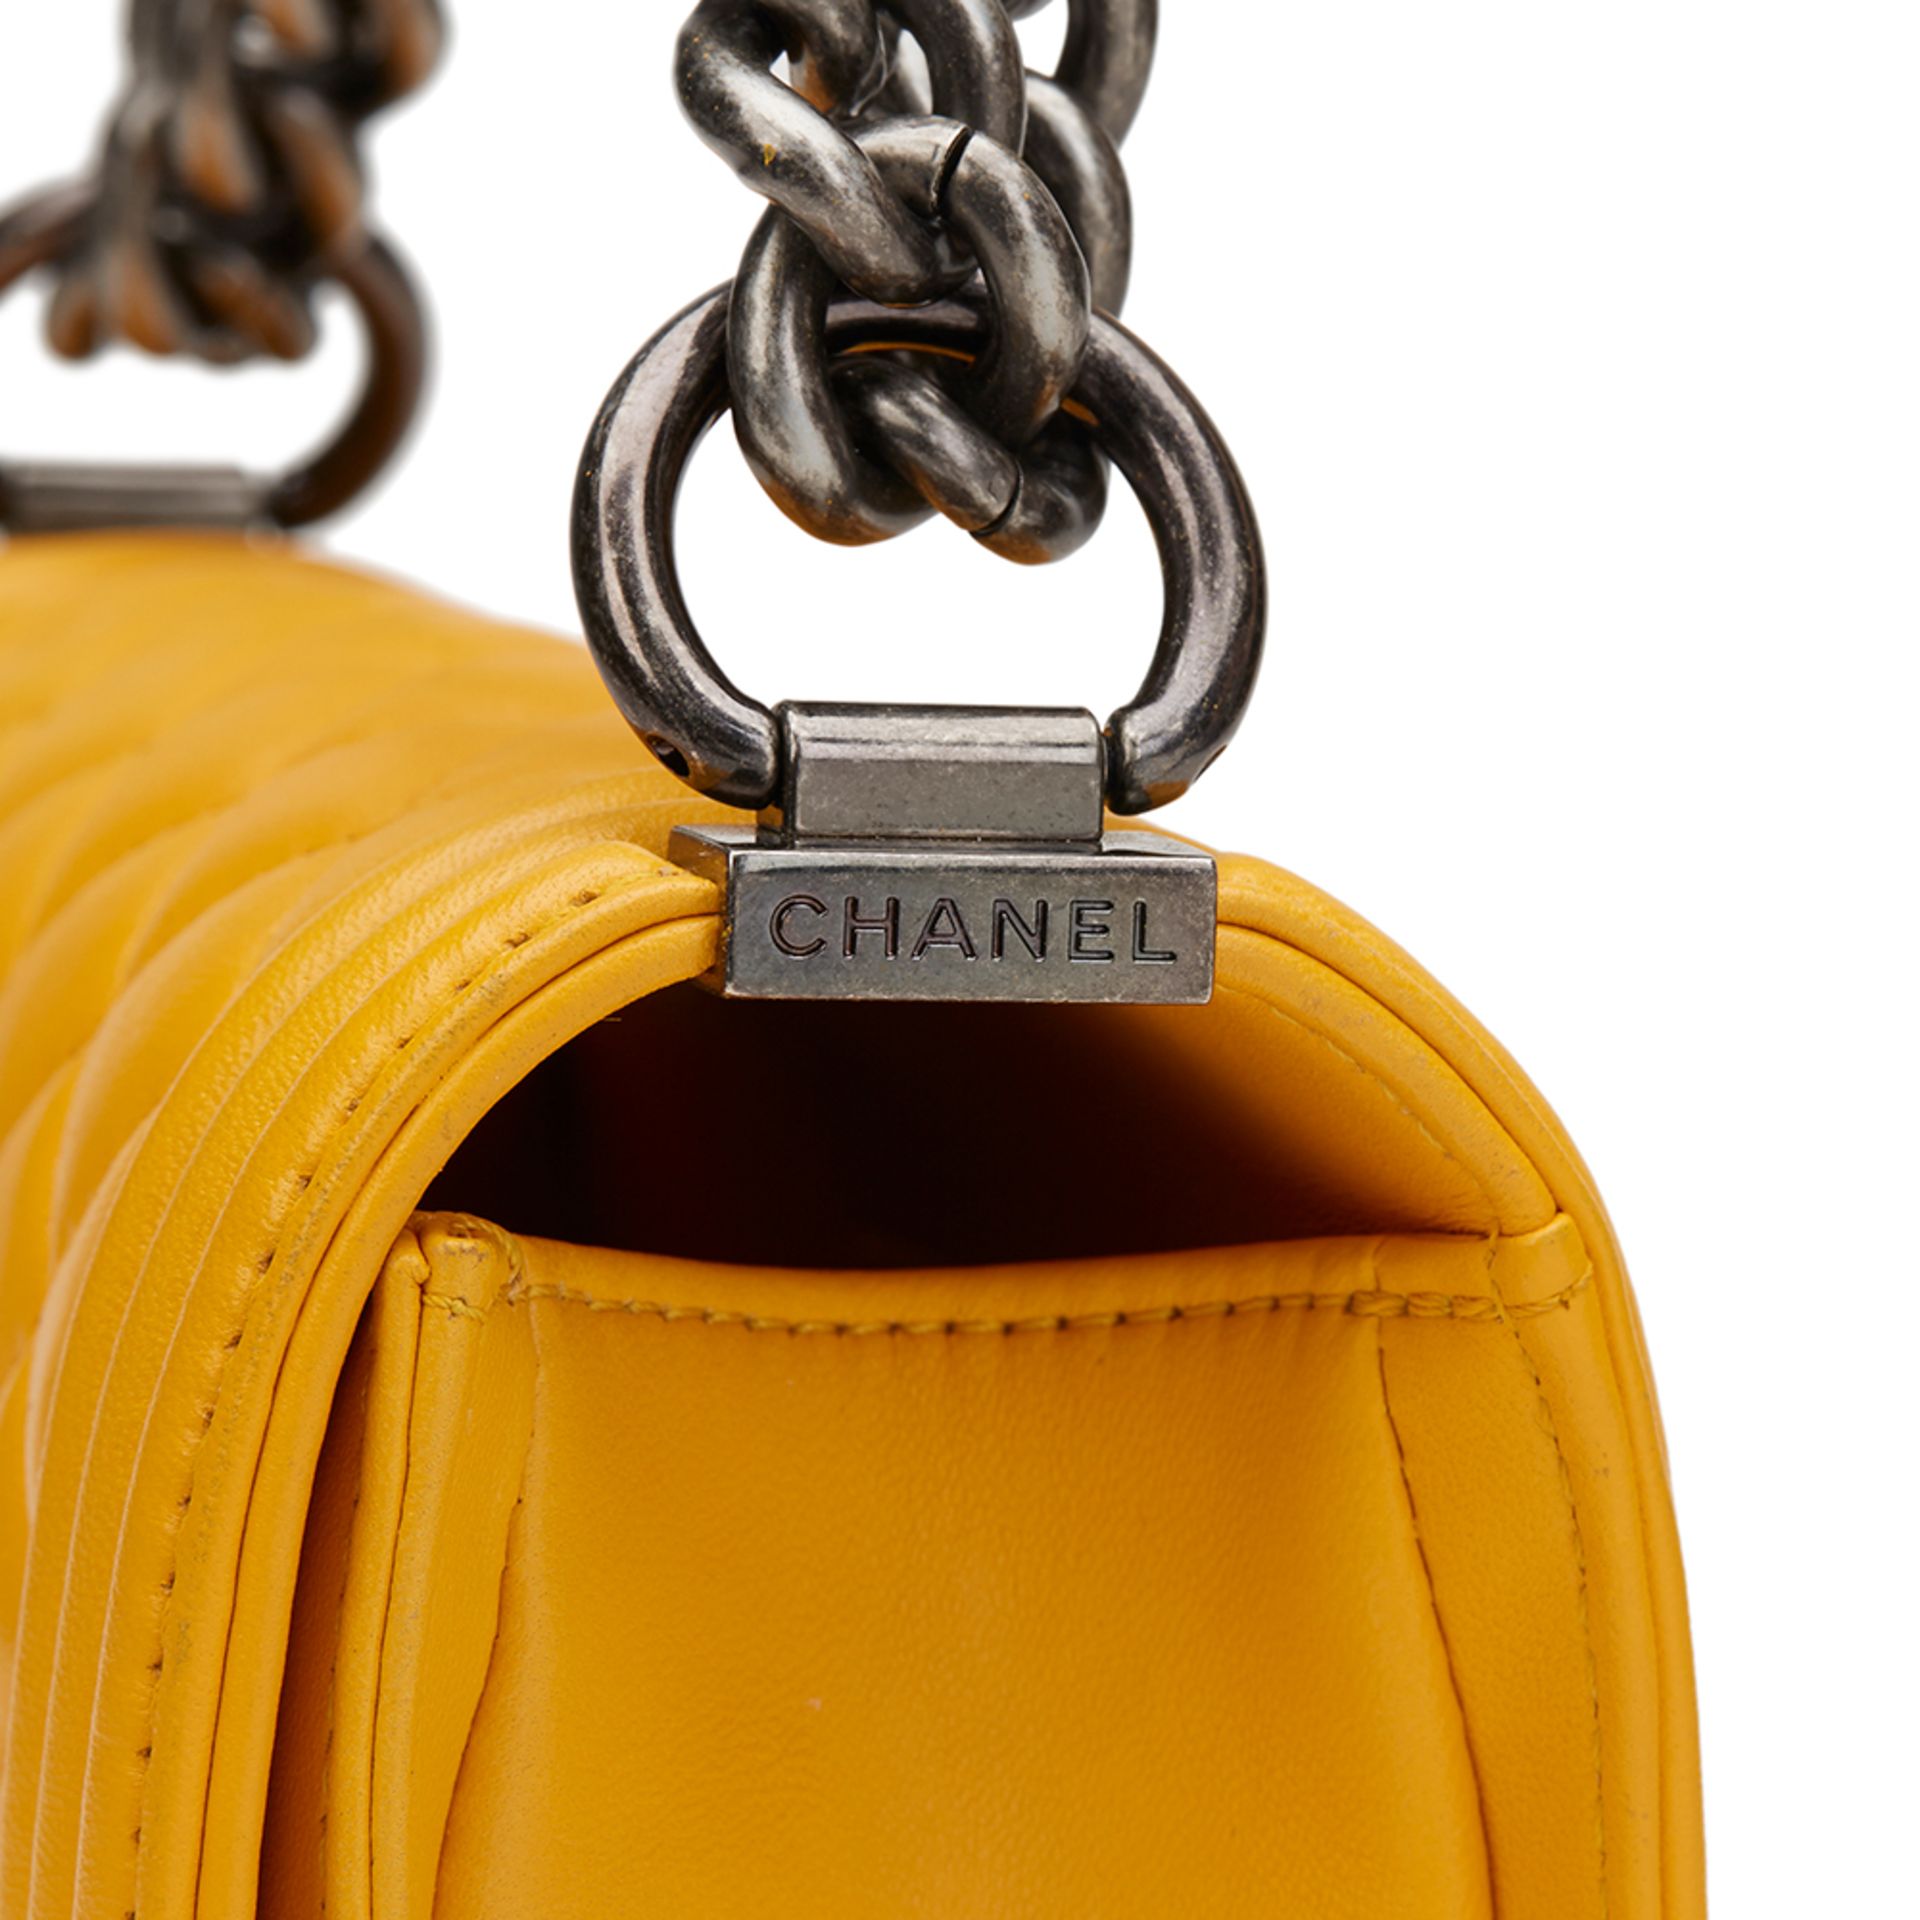 Chanel Small Le Boy - Image 14 of 19